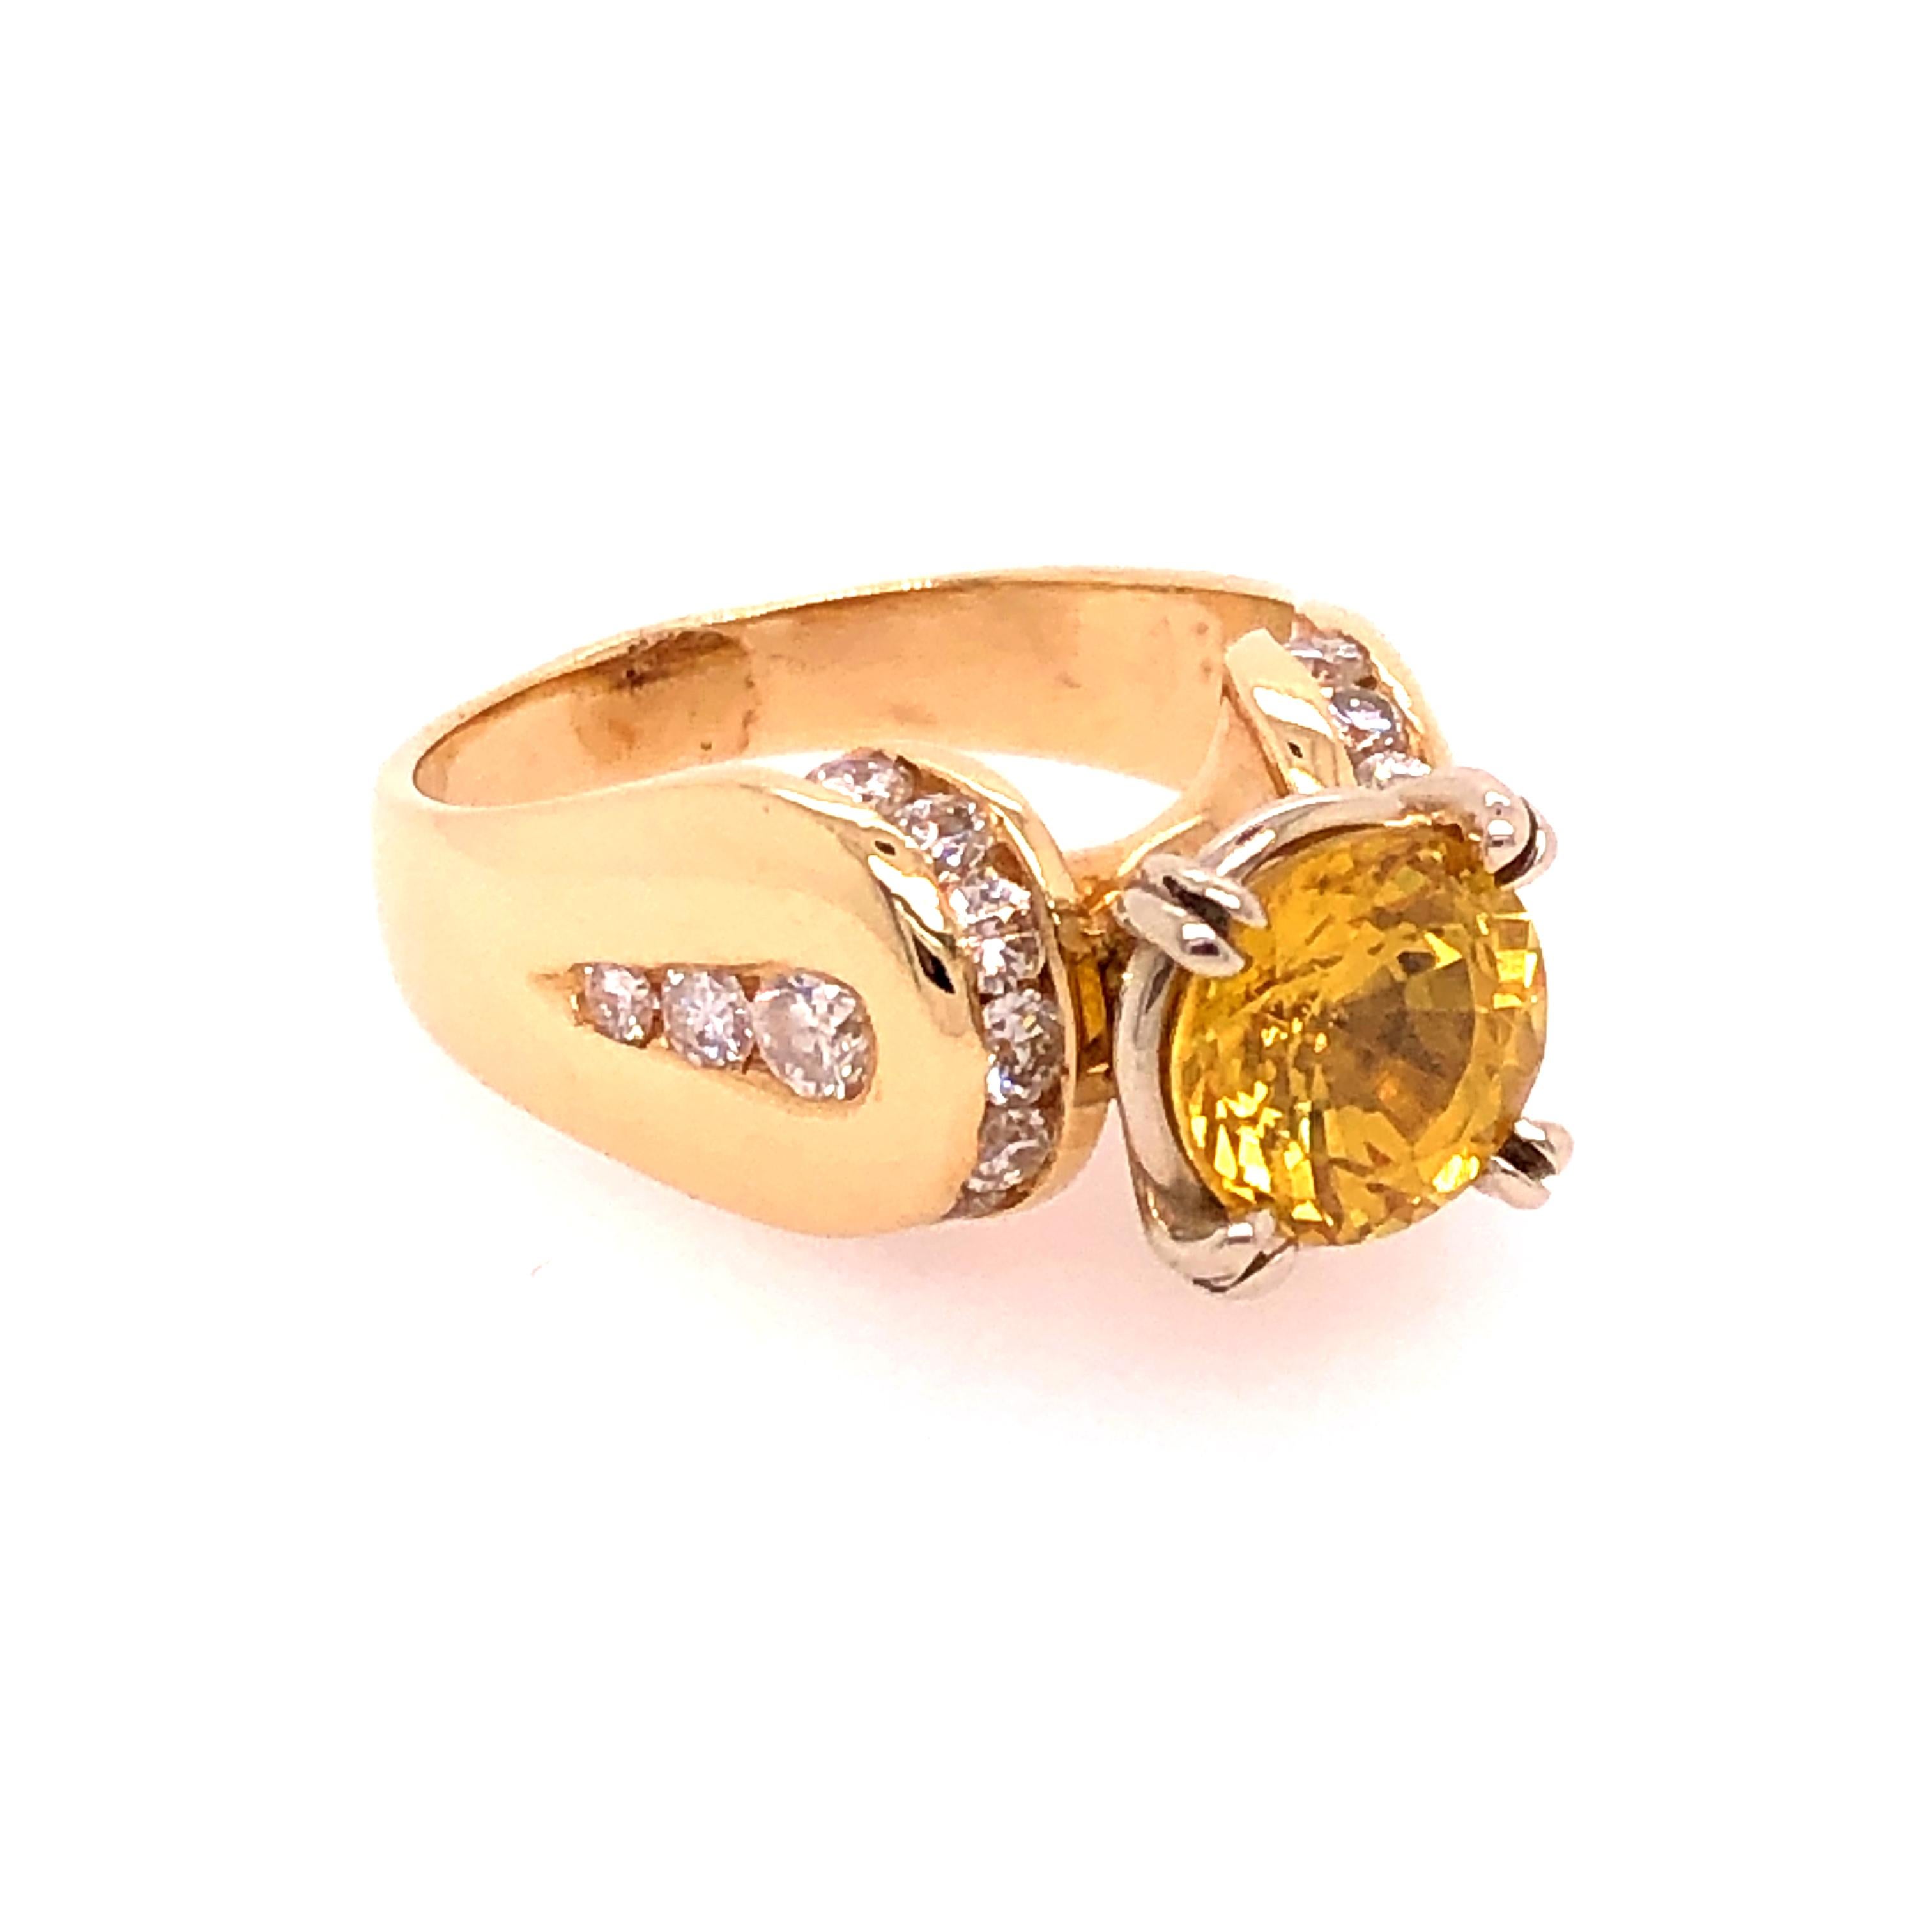 Character and substance, that is how I would define the design of this Yellow Sapphire and Diamond ring. We start with a well cut 2.18 CT round yellow sapphire set into a 14K white gold head. The head is set into the 14K yellow gold ring. The